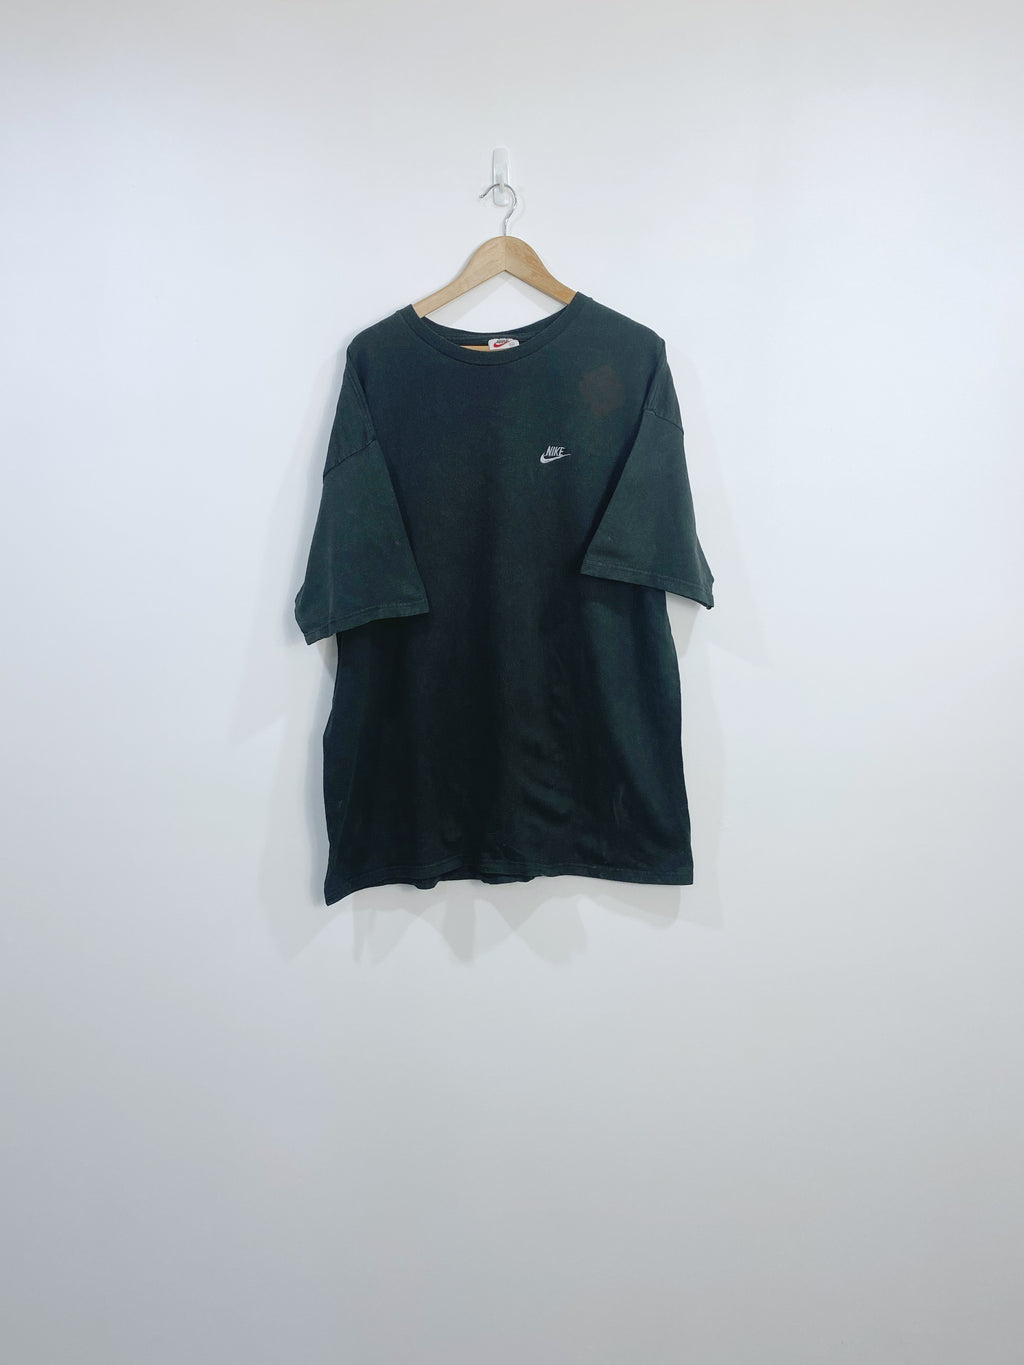 Vintage 90s Nike Embroidered T-shirt XXL